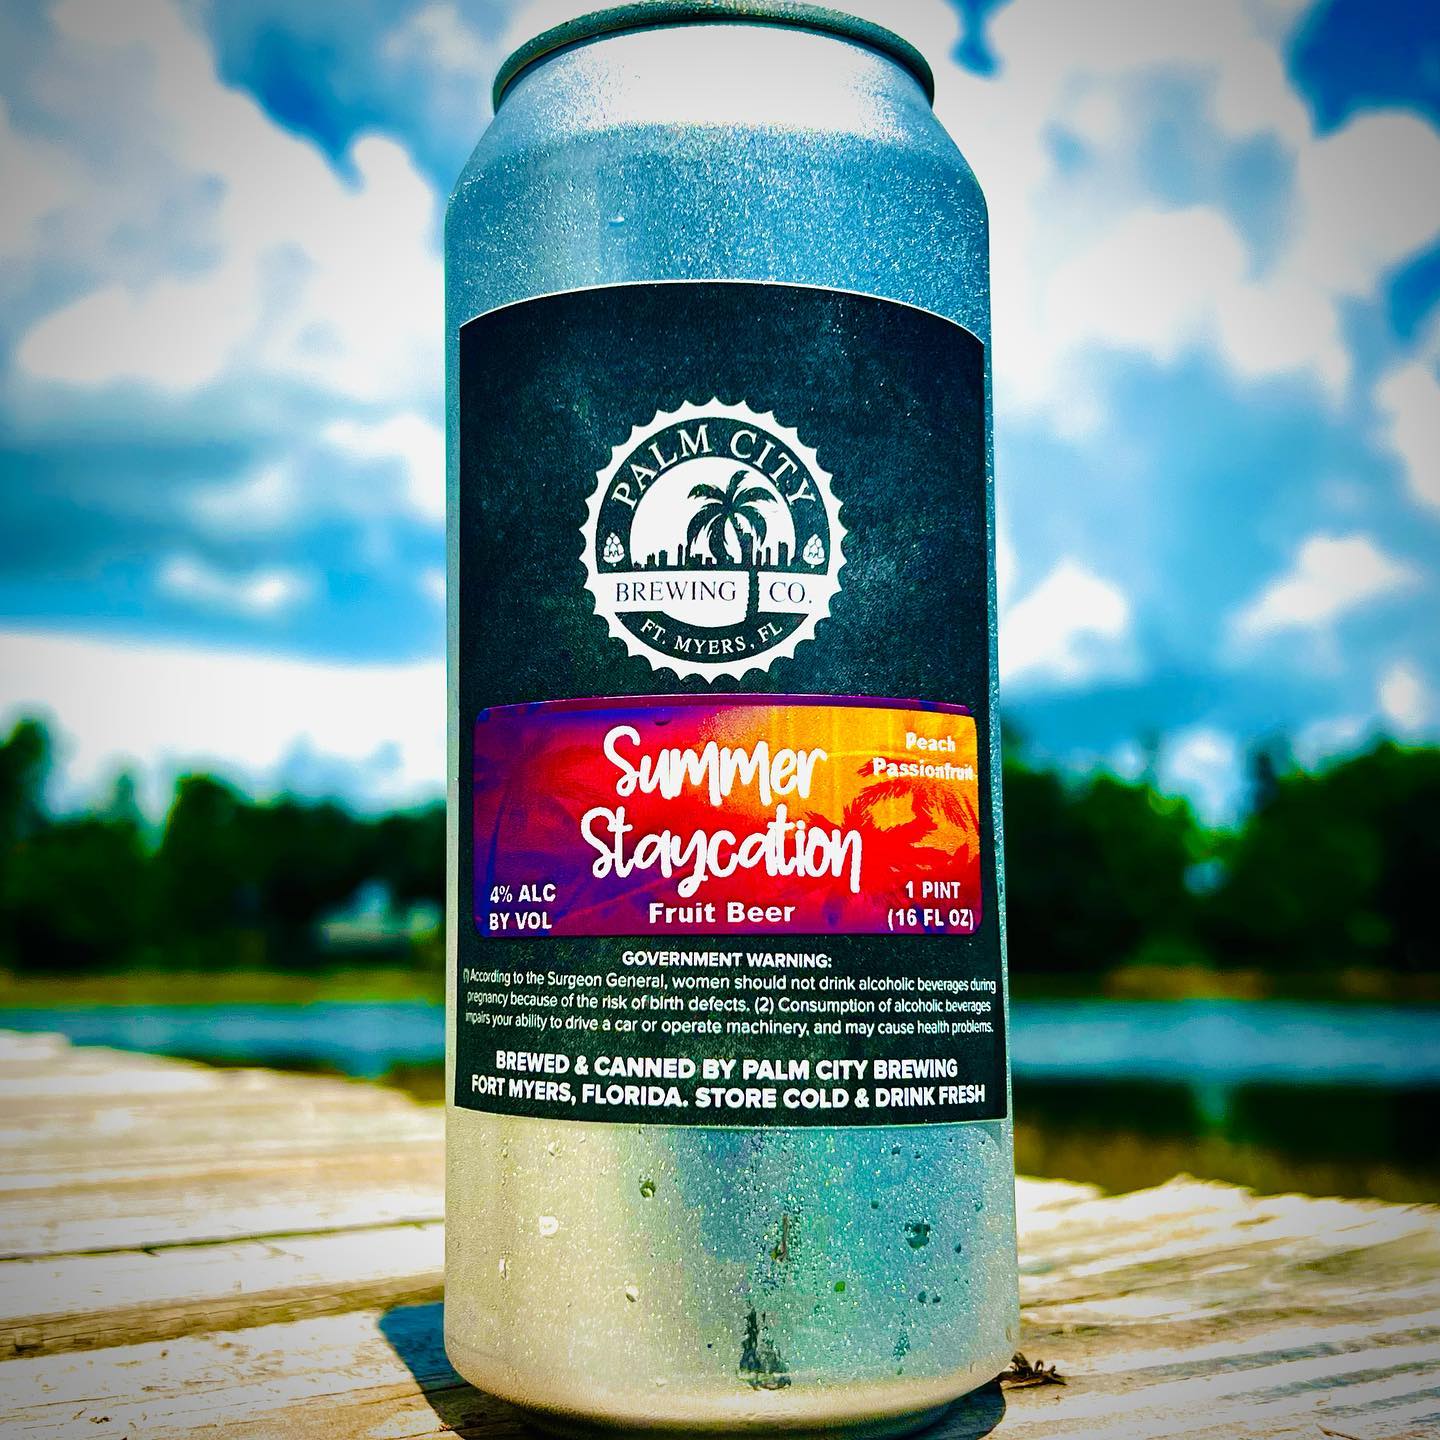 Palm City Brewing - Summer Staycation Fruit Beer